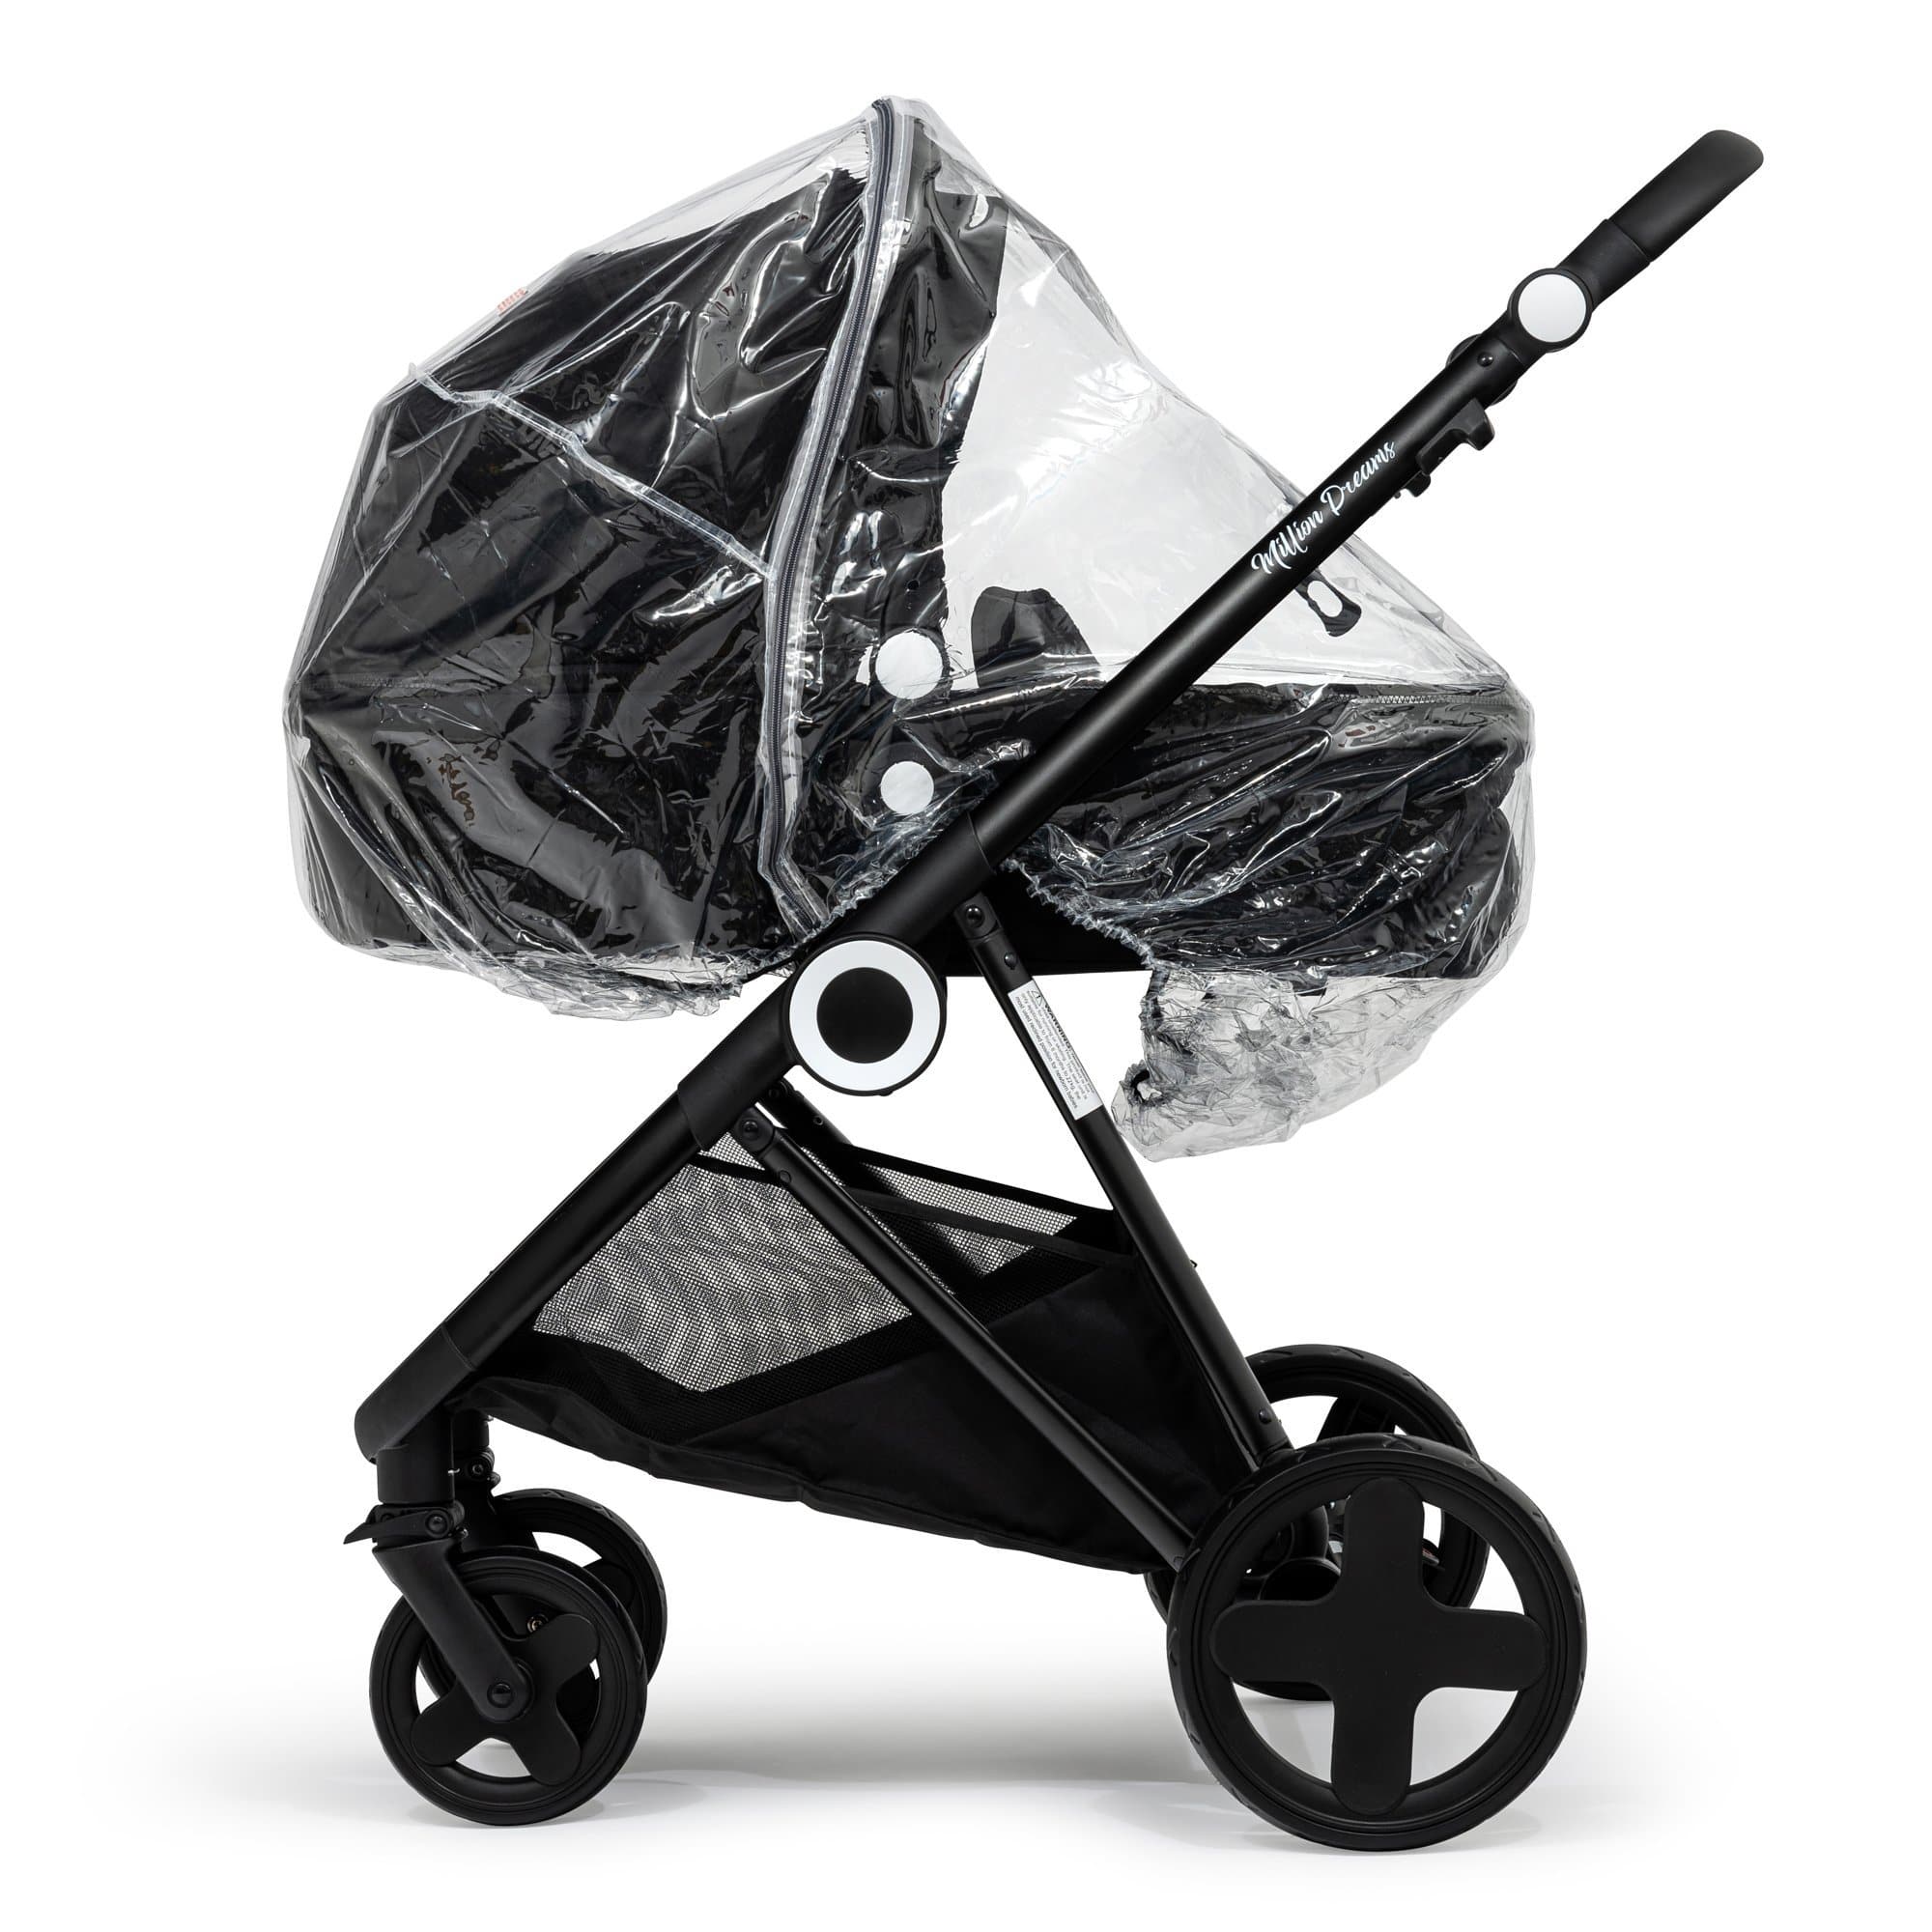 2 in 1 Rain Cover Compatible with Uppababy - Fits All Models - For Your Little One